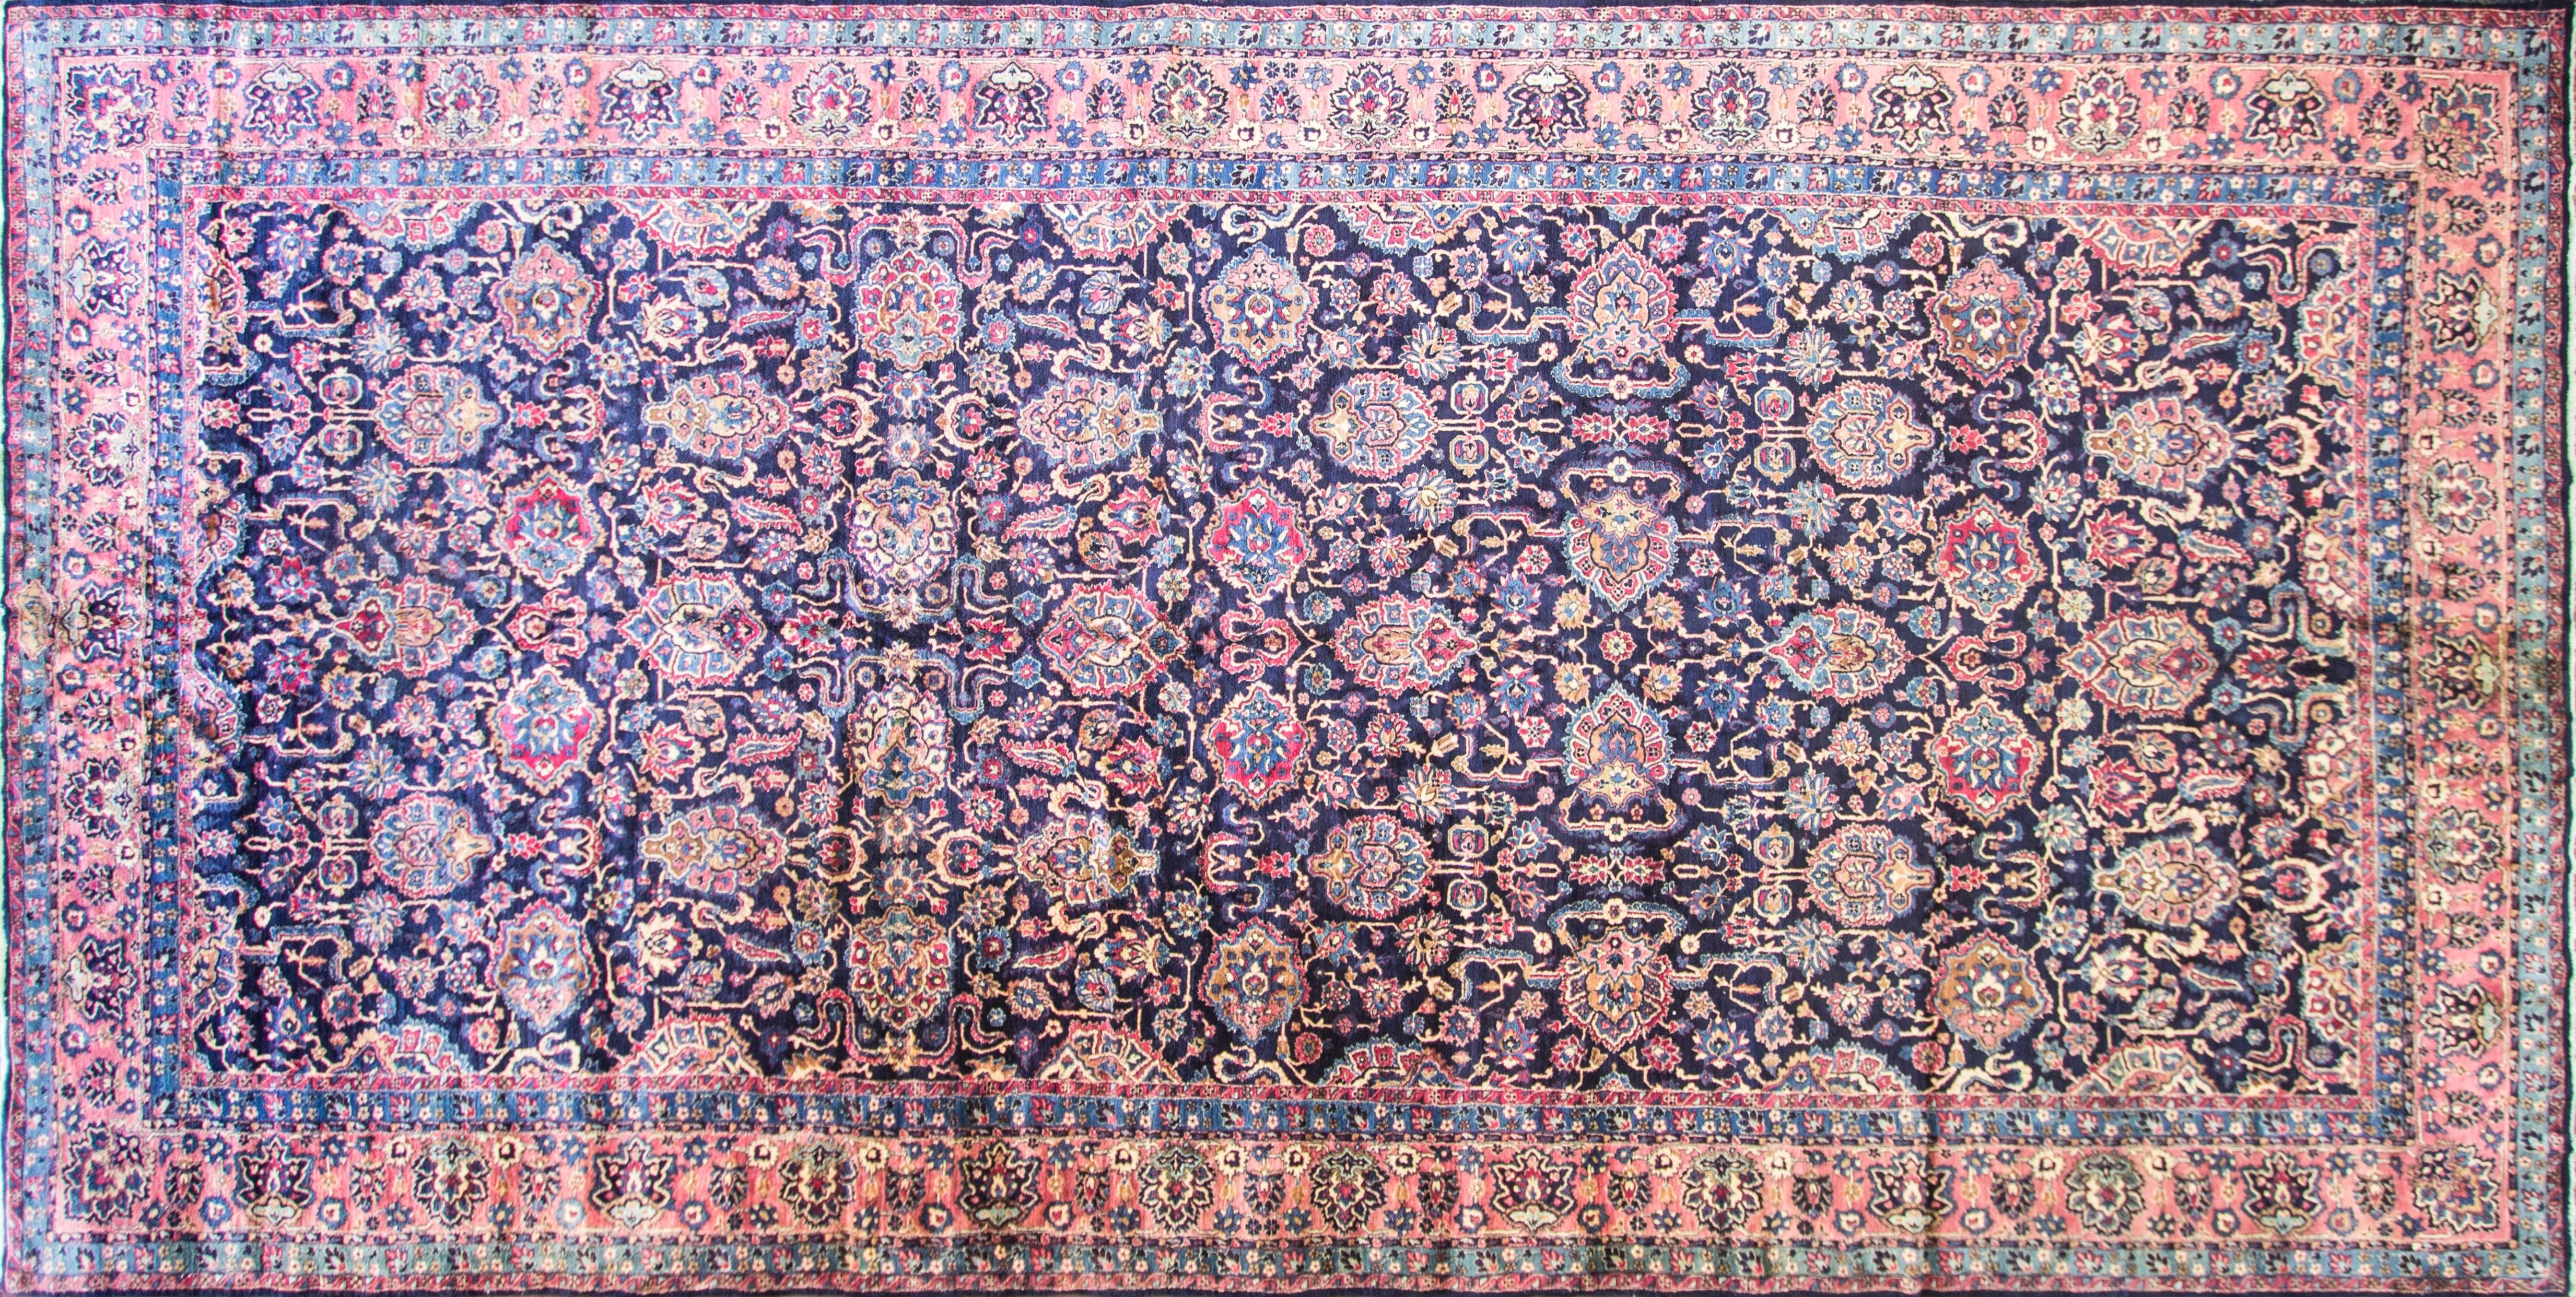 Amazing oversize and very fine antique Persian Kerman carpet in excellent condition, circa 1920 with all-over large floral design.
Kirman was a very important antique rug weaving centre dating from the Golden Age of Persian culture under the